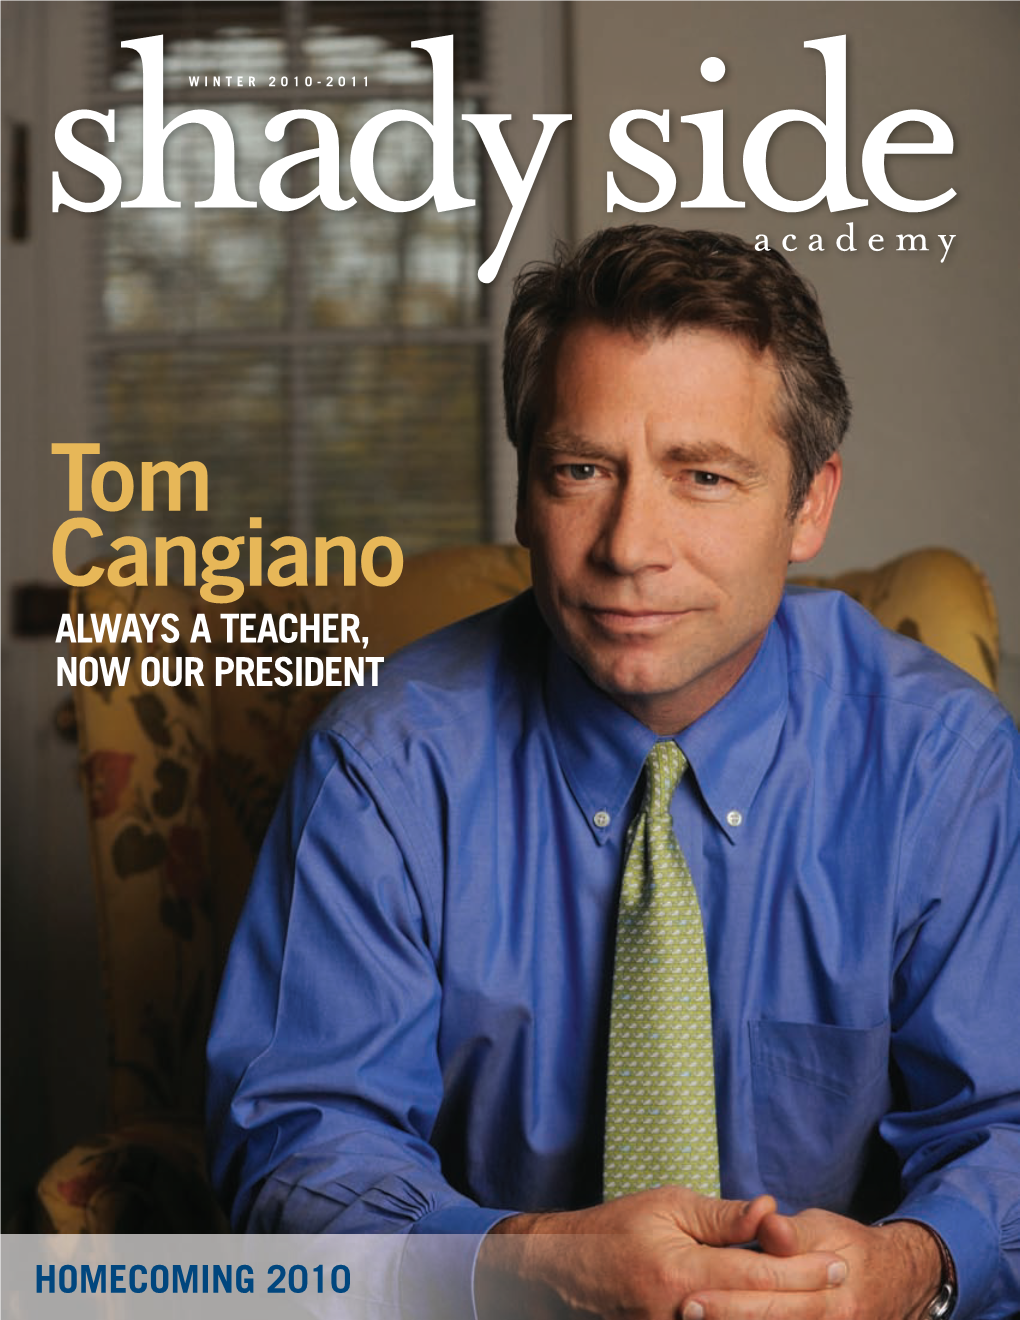 Tom Cangiano Always a Teacher, Now Our President